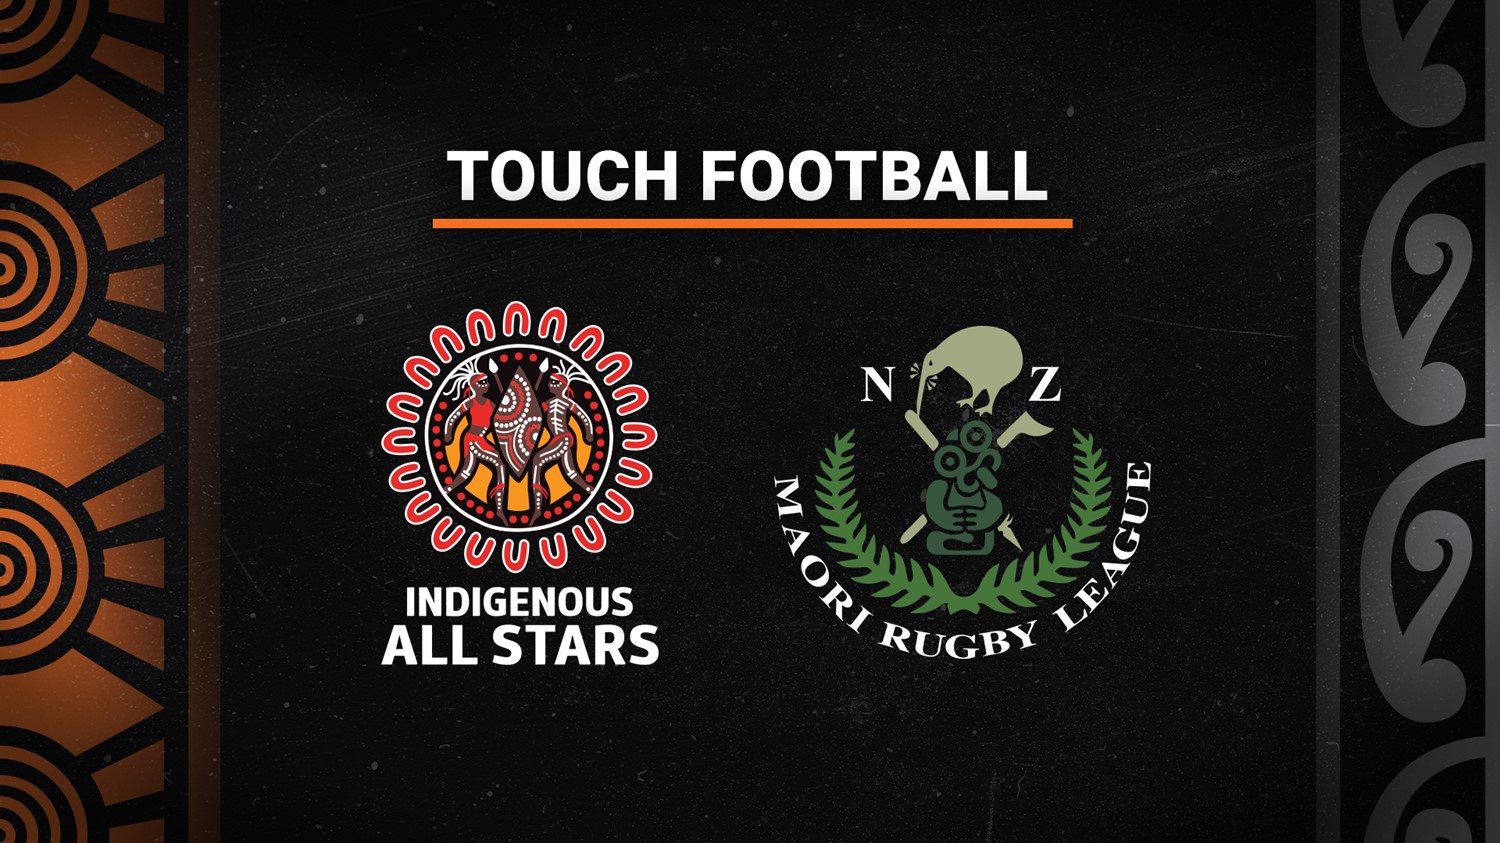 220212-National Touch League (NTL) All Stars Match - INDIGENOUS v MĀORI Slate Image